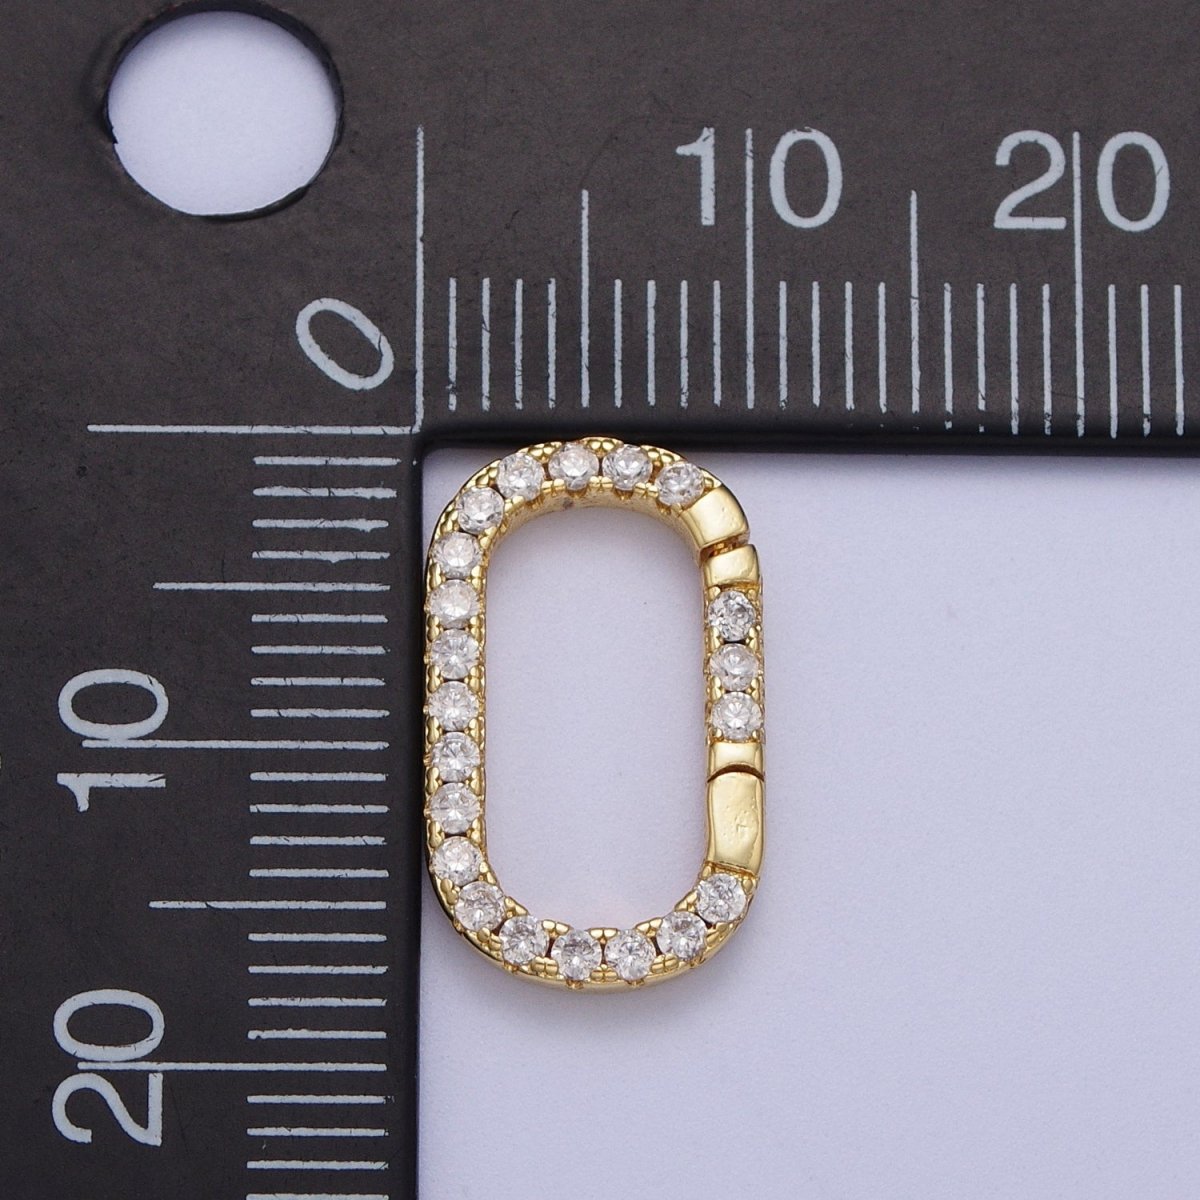 24K Gold Filled Clear Micro Paved CZ Long Oval Spring Gate Ring Supply For Jewelry Making L-935 - DLUXCA